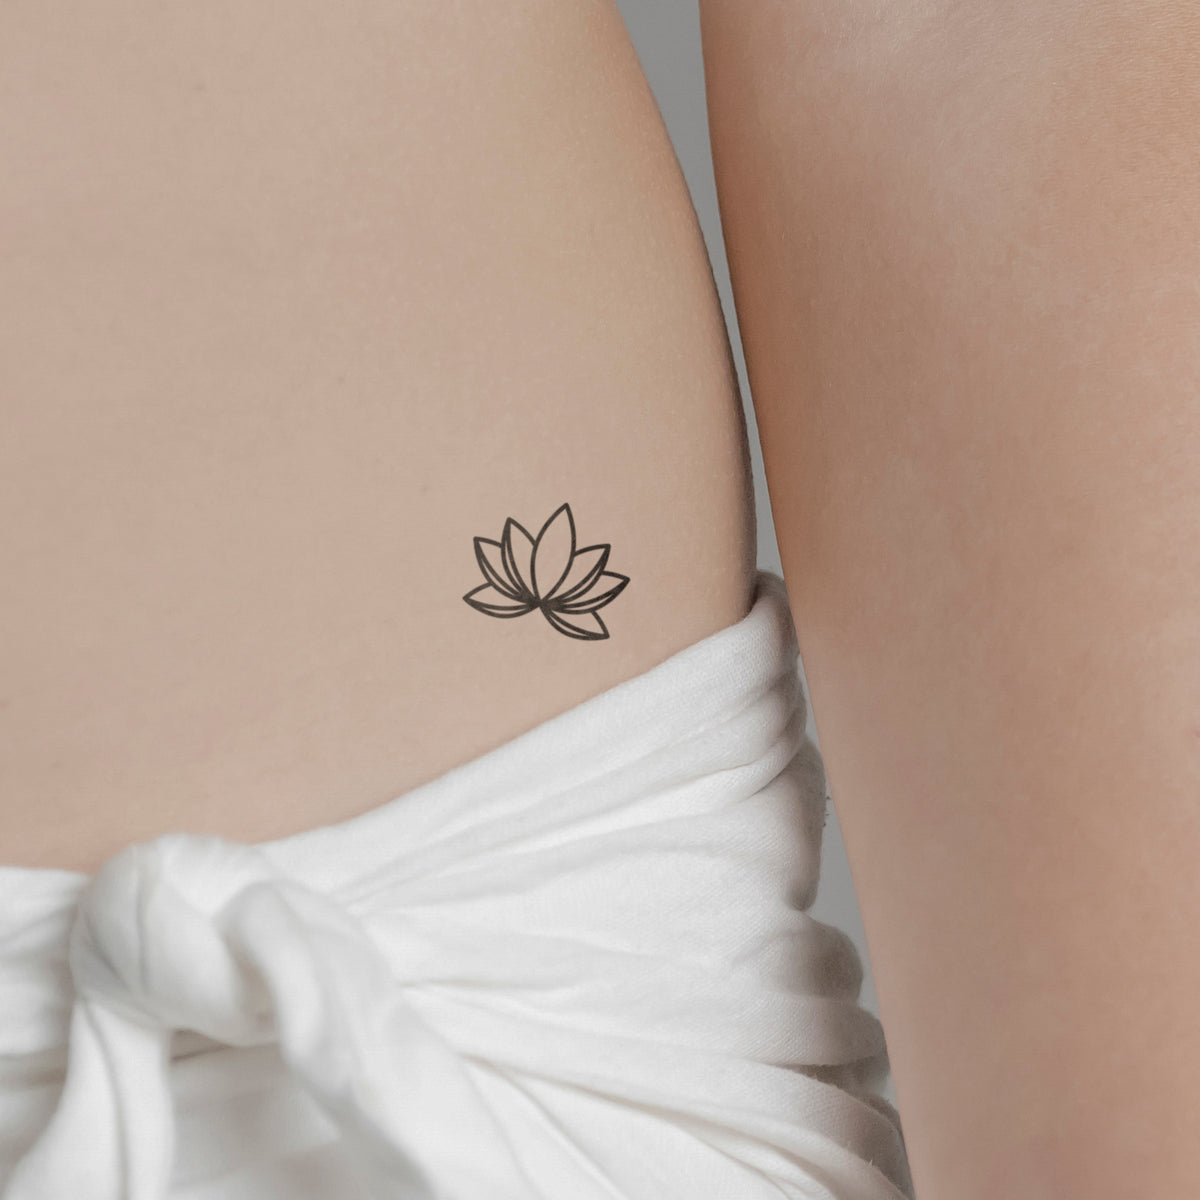 Minimalist artwork of a lotus flower with a flying bird on Craiyon